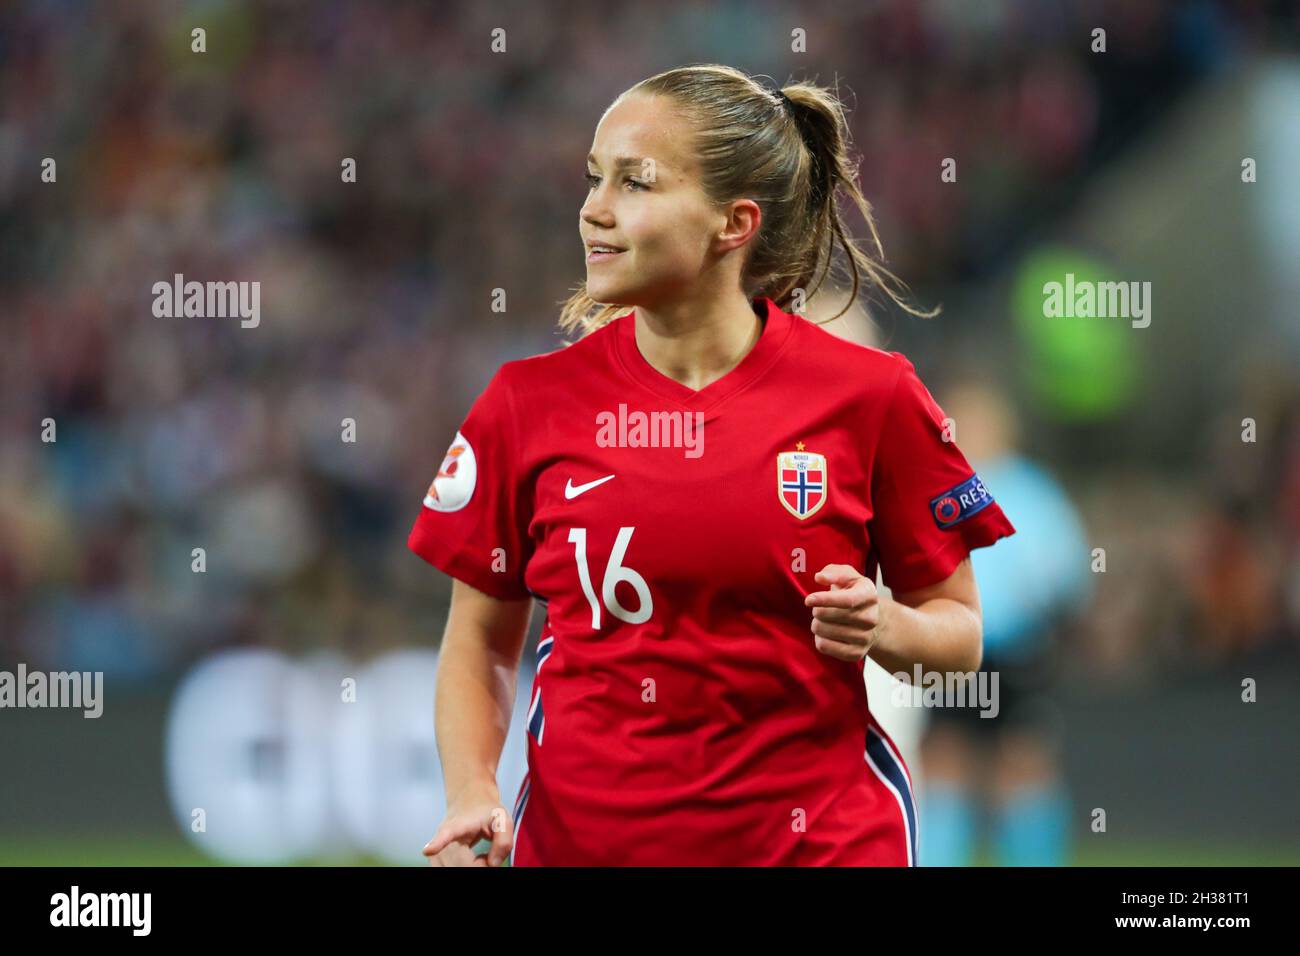 Oslo, Norway. 26th Oct, 2021. Ullevaal Stadium Guro Reiten (16) of Norway  runs to the corner flag during a female soccer game between the national  teams of Norway and Belgium, called the